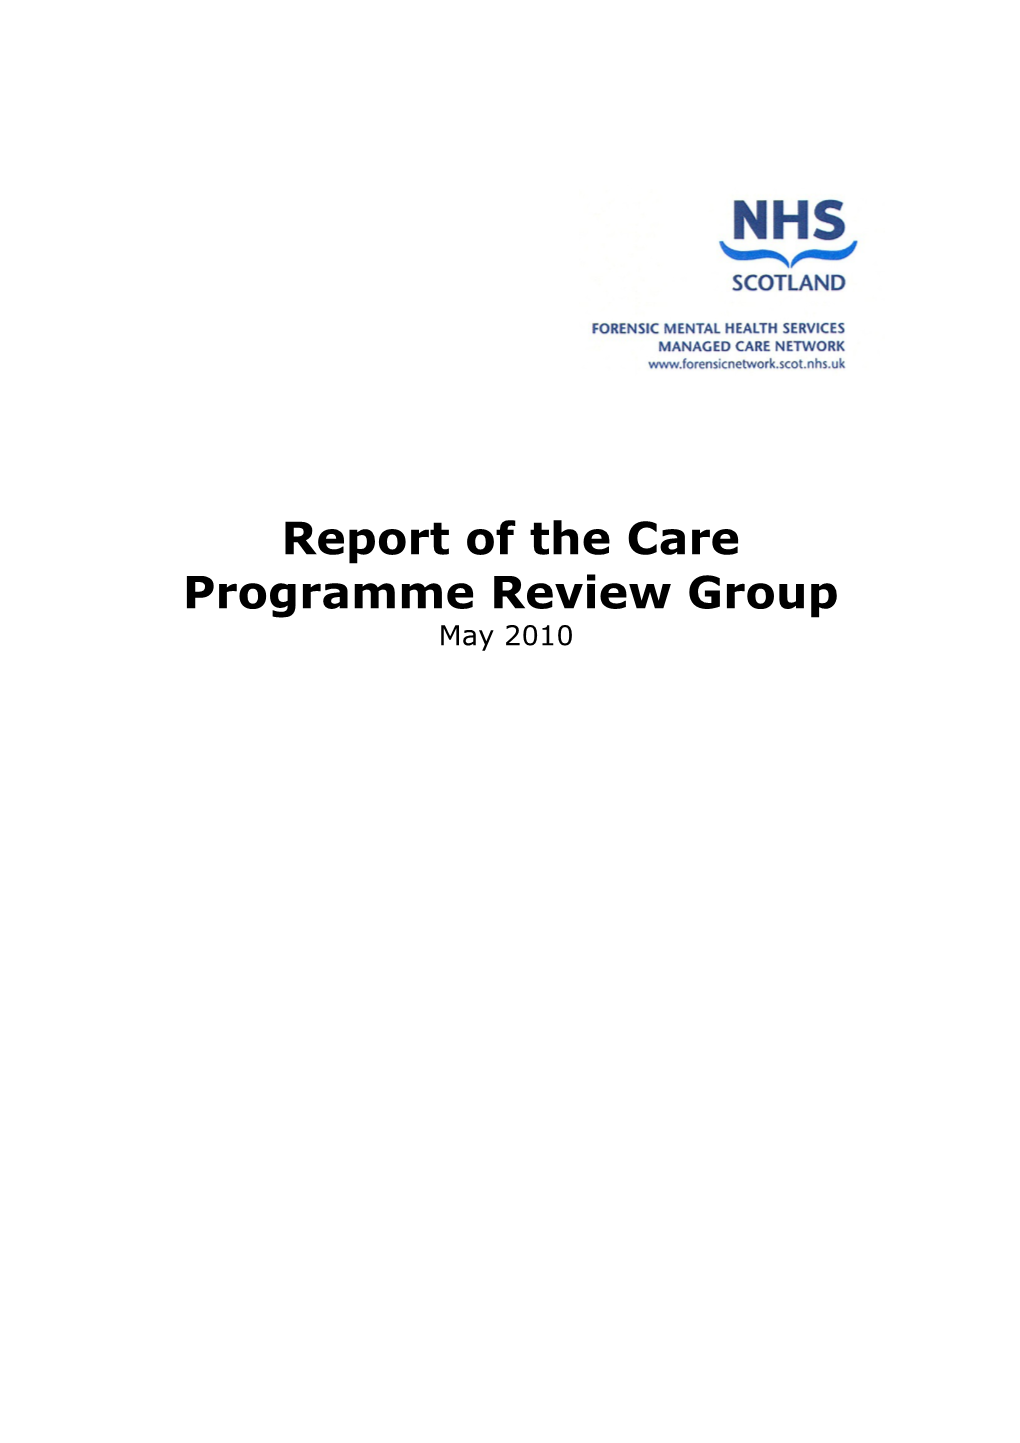 Report of the Forensic Network CPA Review Group, November 2009